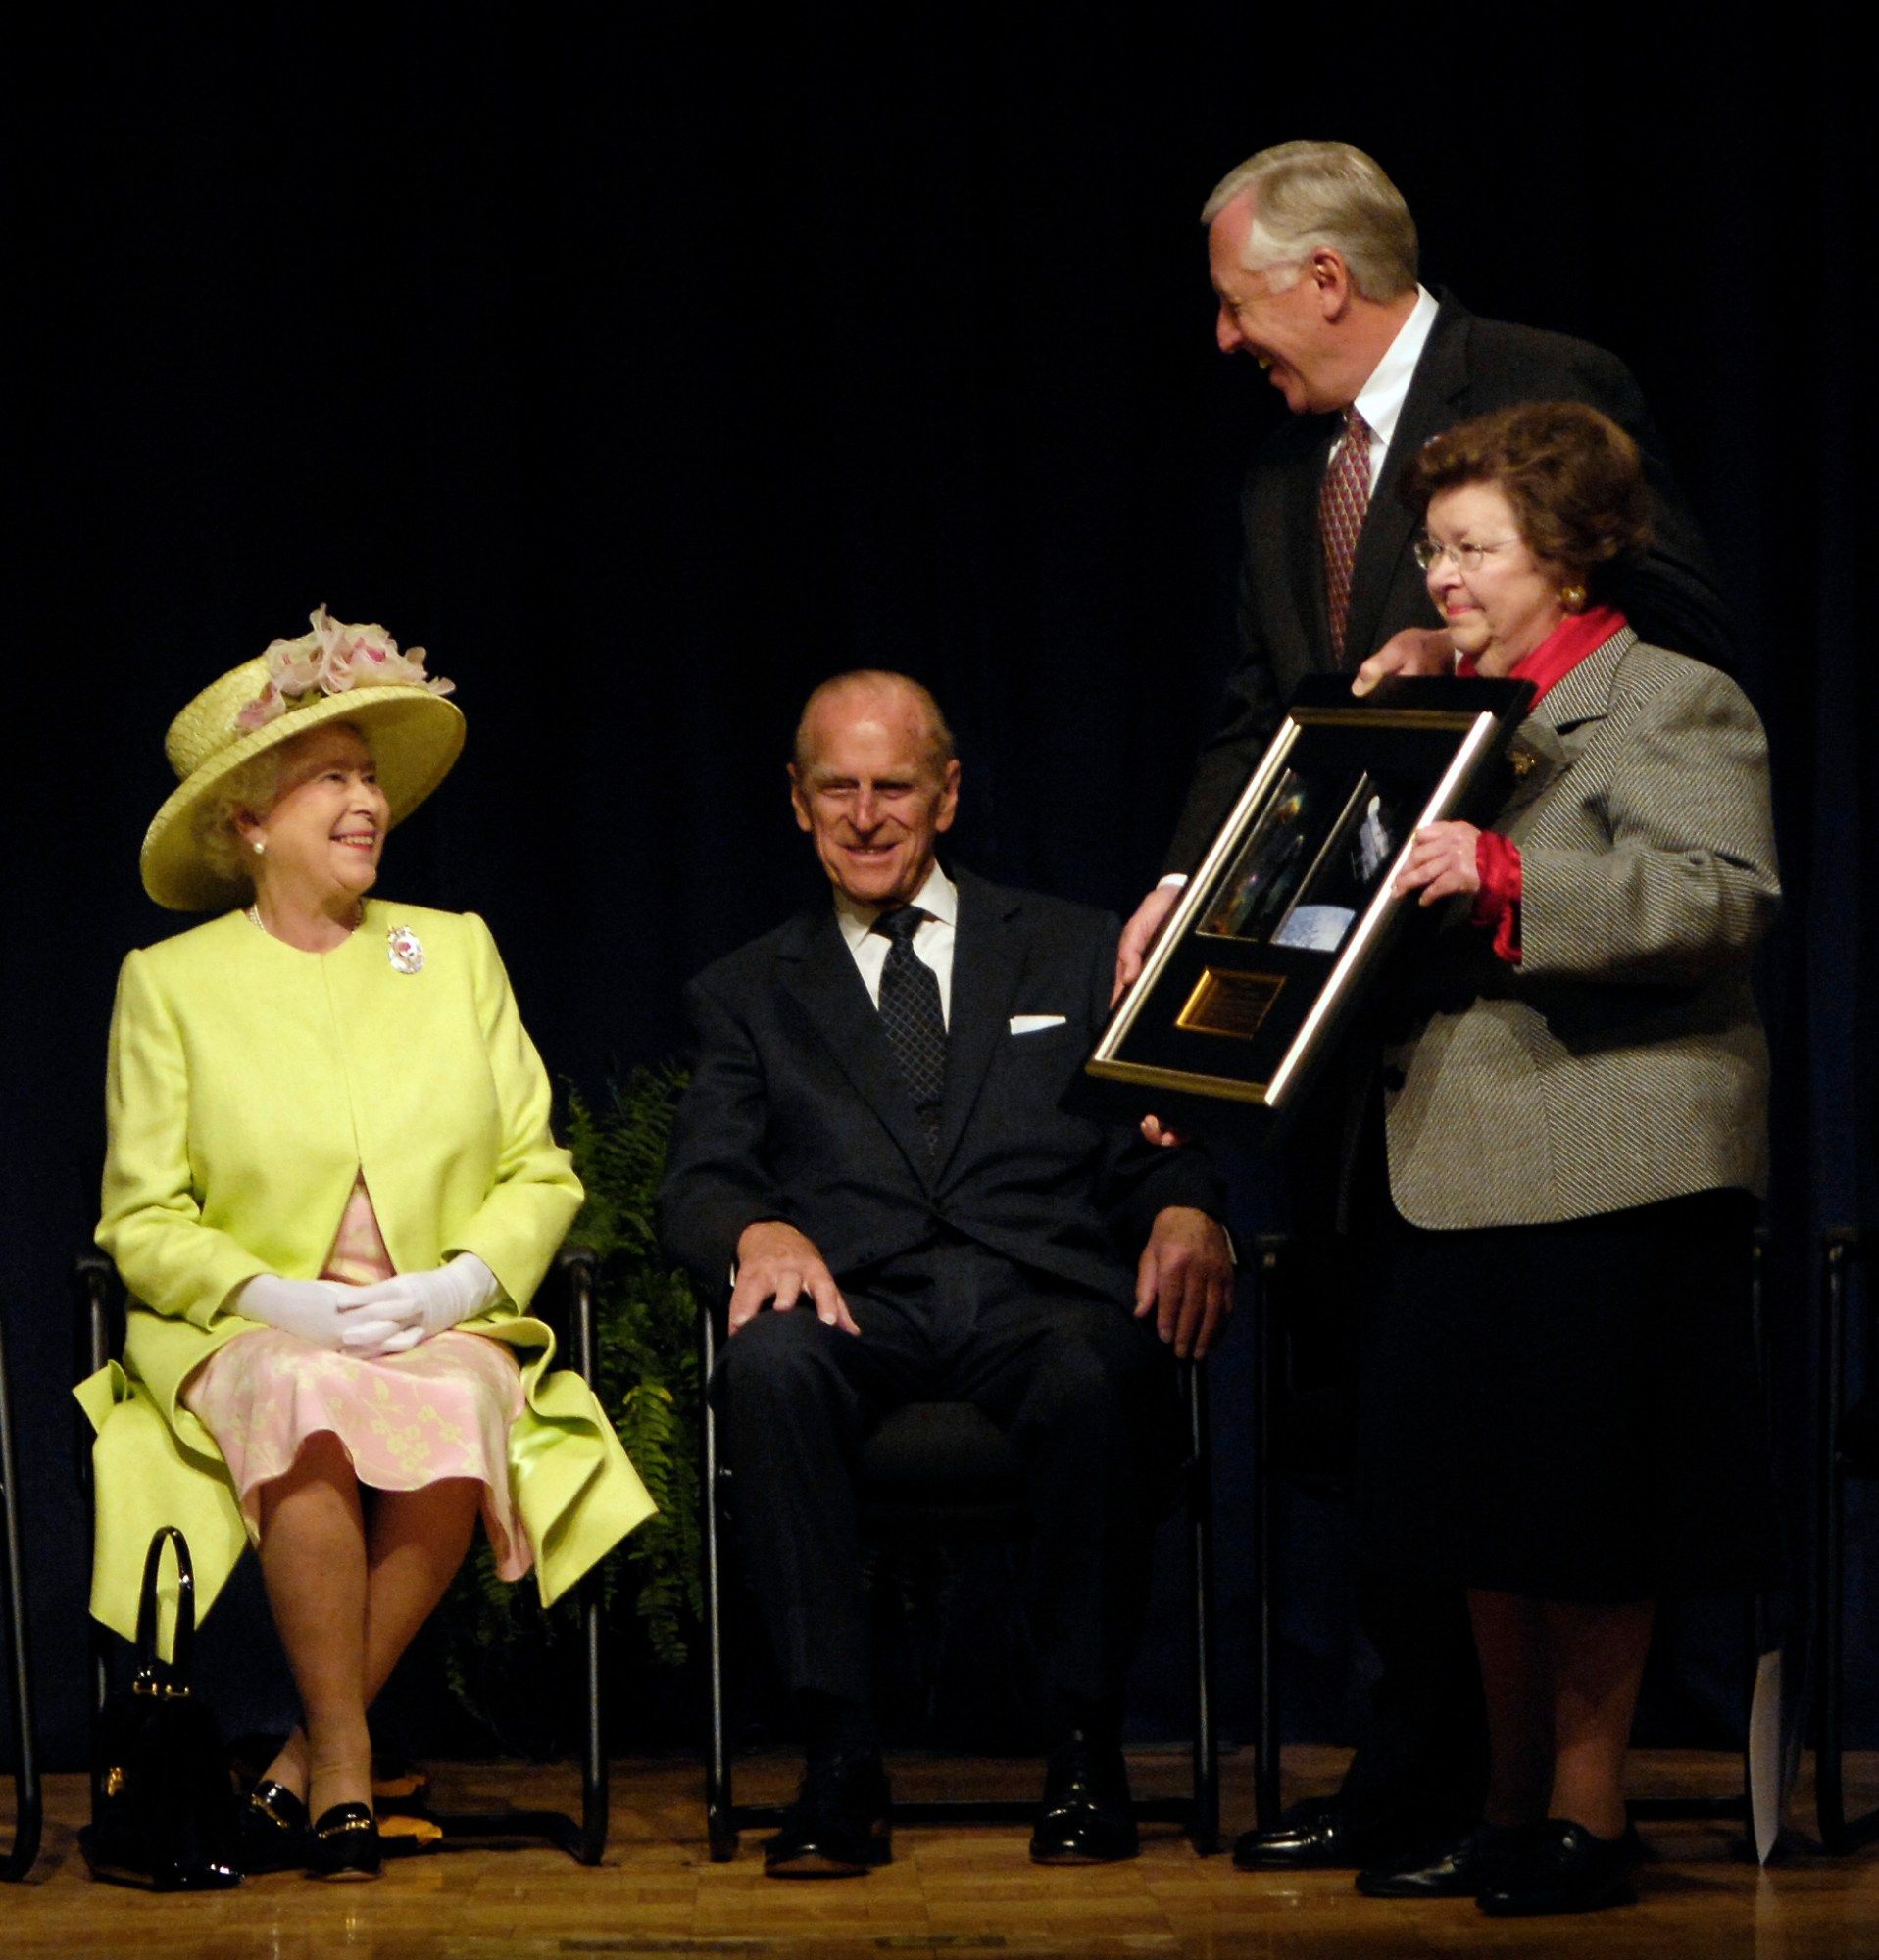 Queen Elizabeth of England, wearing a yellow coat and yellow hat with pink flowers and seated next to Prince Phillip in a dark suit, is presented with a framed Hubble image featuring photographs of a cosmic object and the telescope by Sen. Barbara Mikulski and Rep. Steny Hoyer.